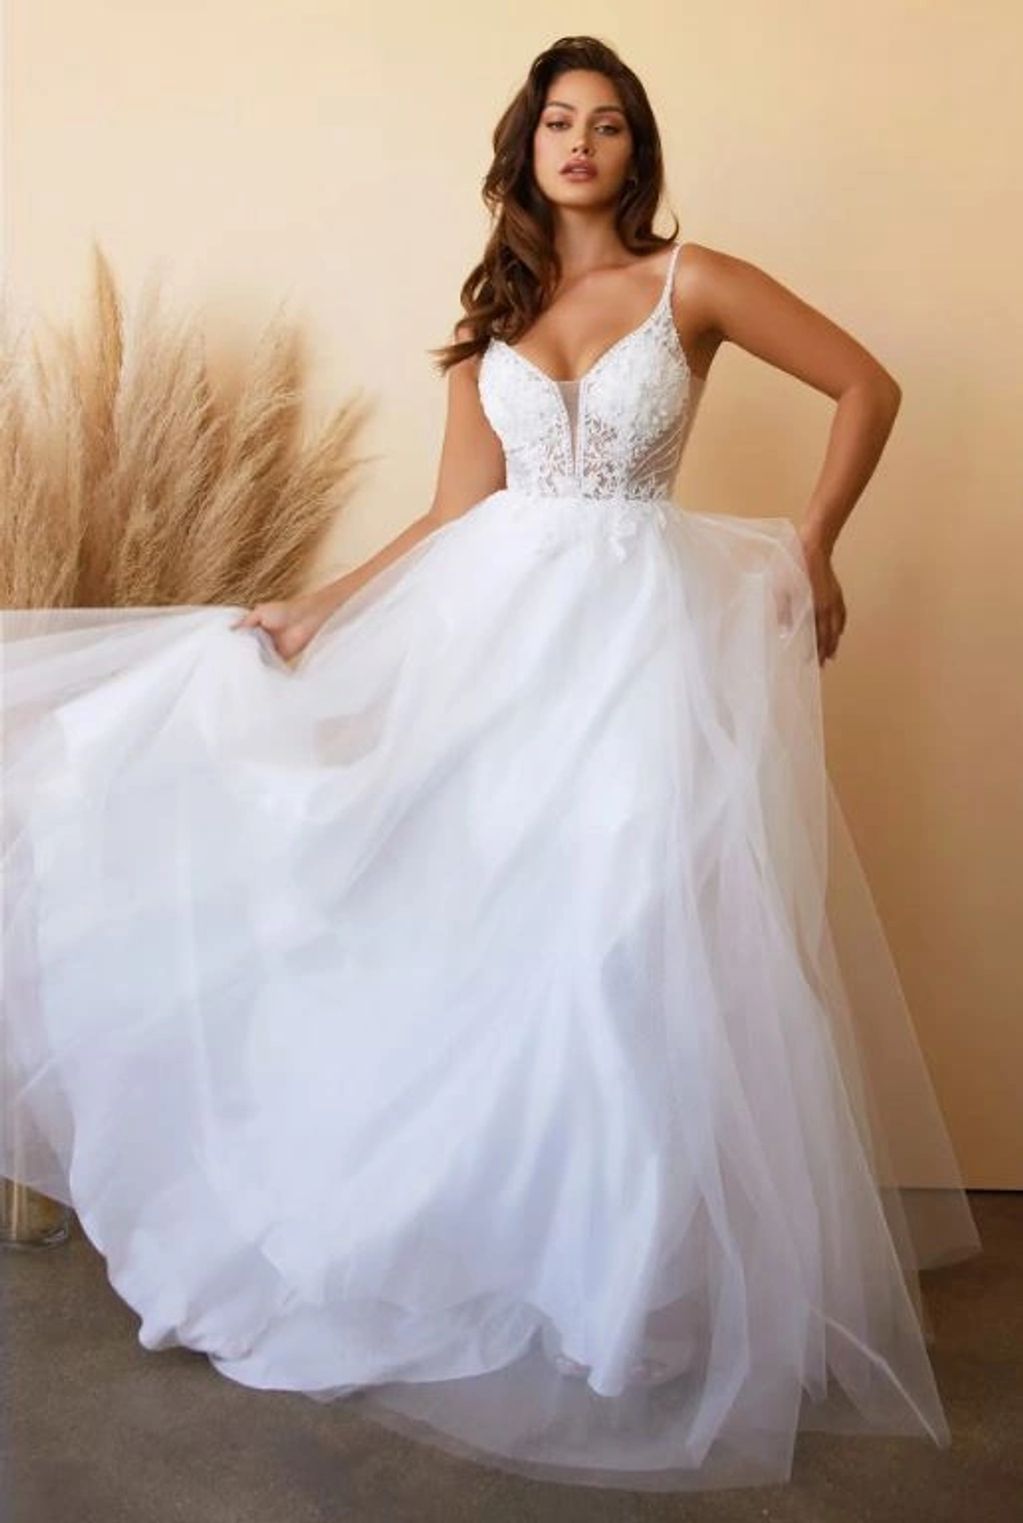 Layered Tulle A-Line Bridal Gown with Embellished Lace
$350.00